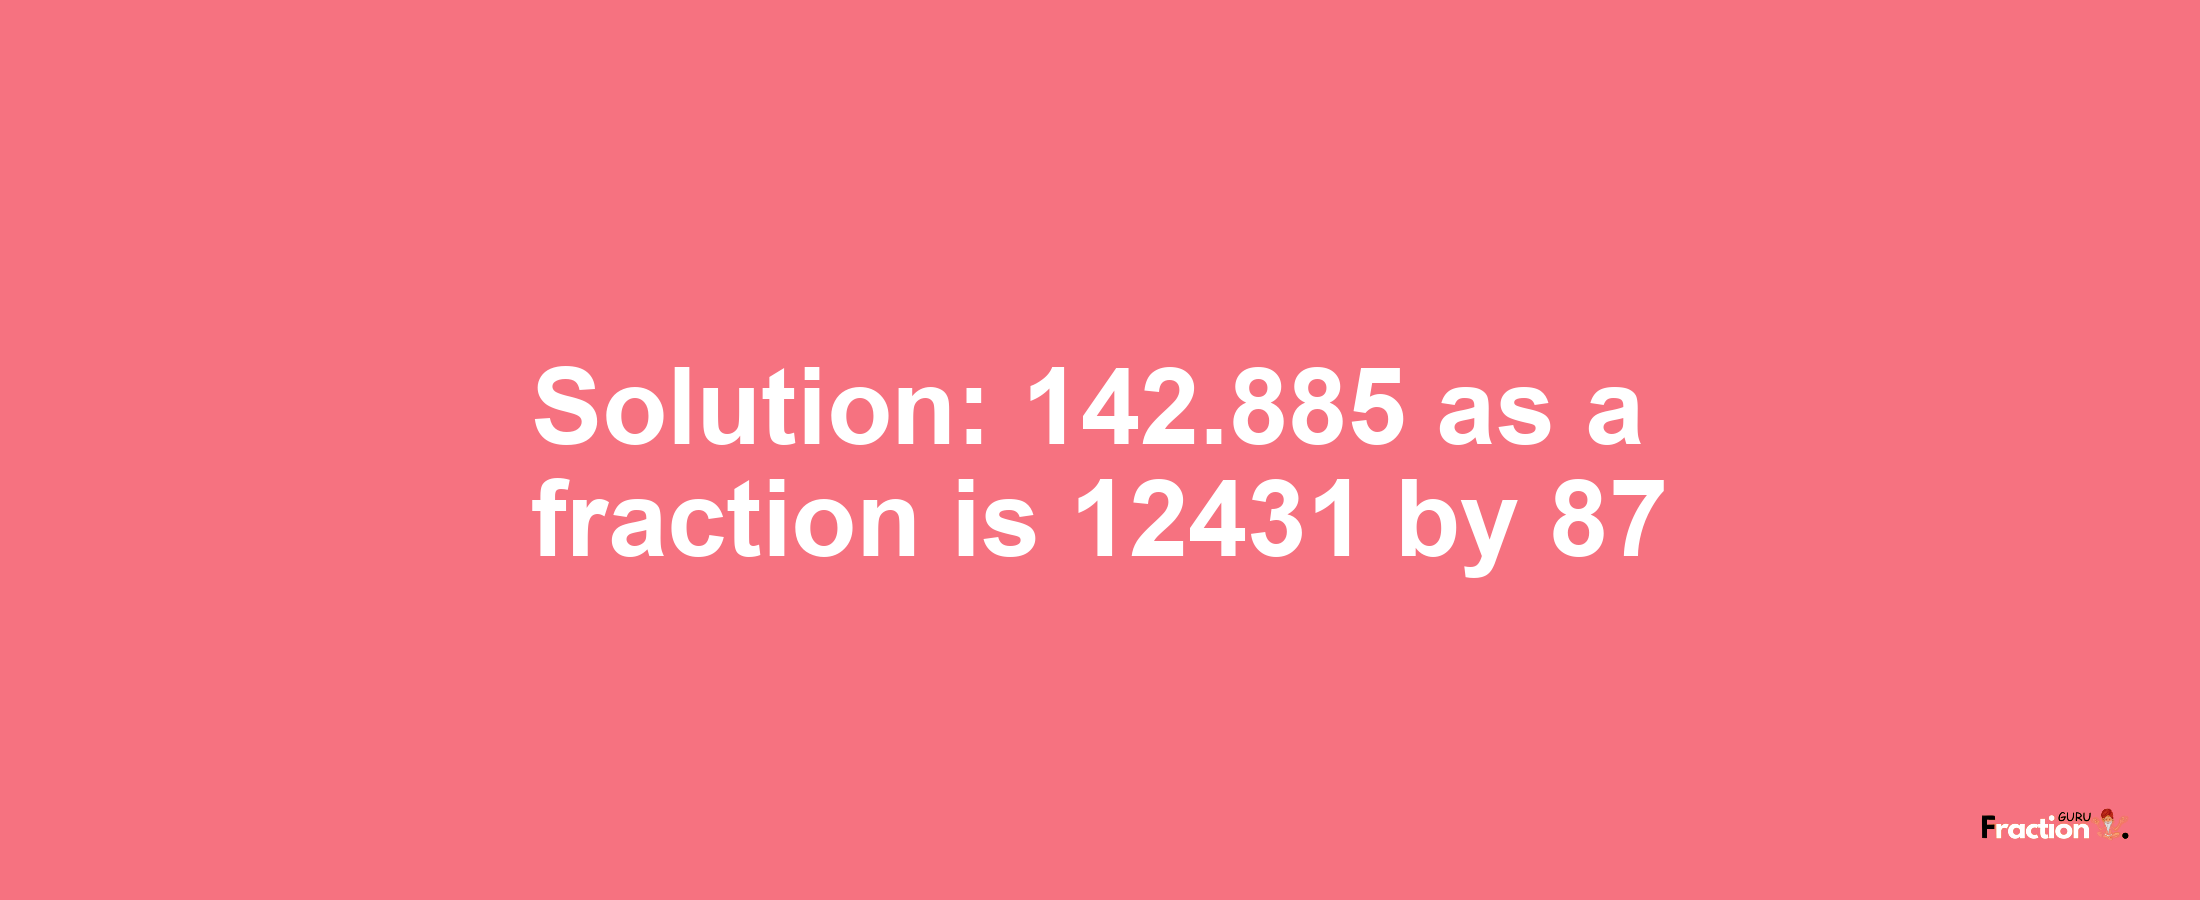 Solution:142.885 as a fraction is 12431/87